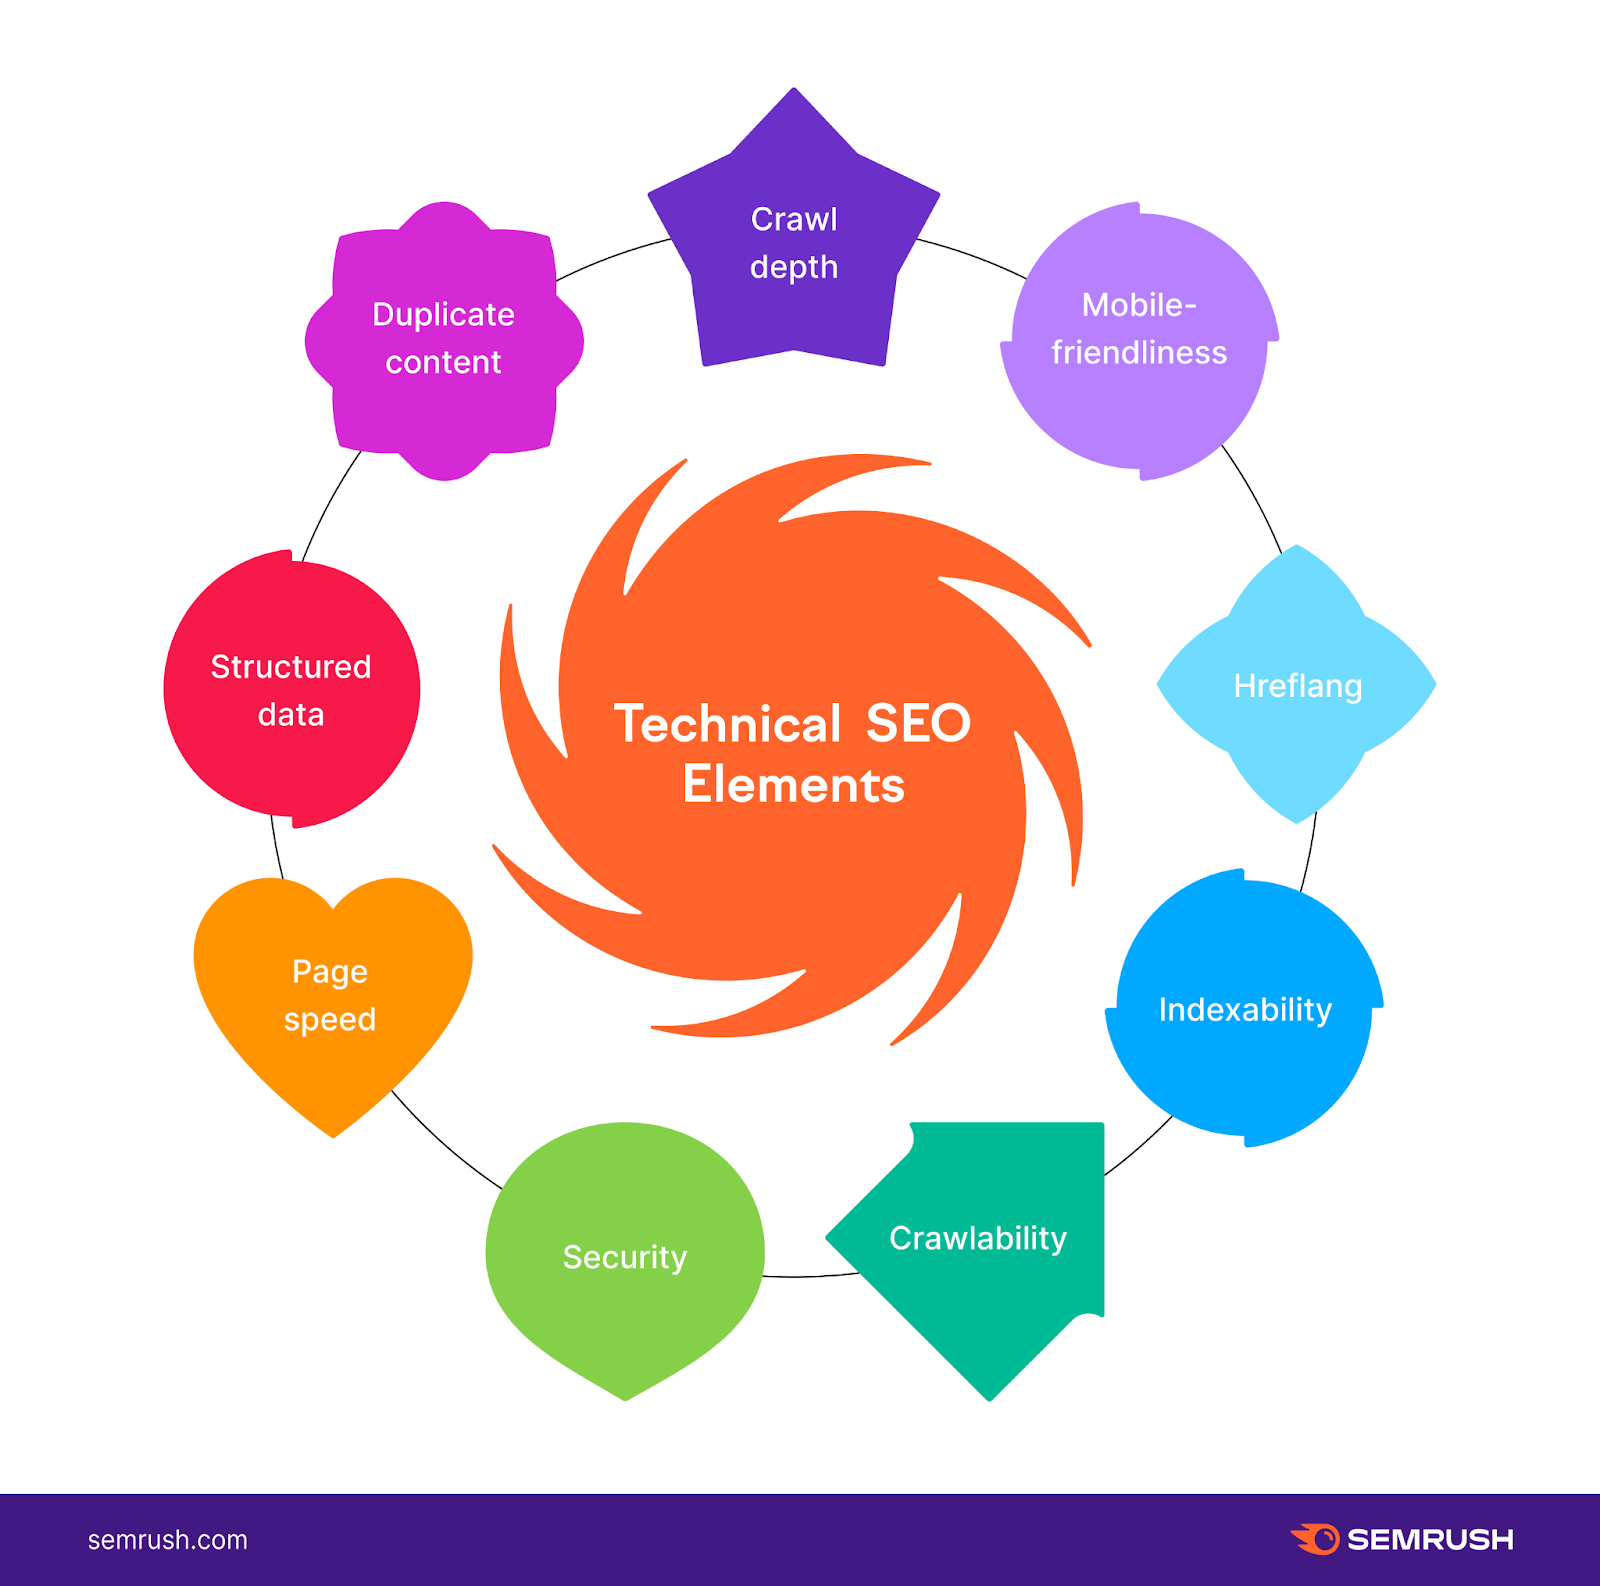 Technical SEO elements listed